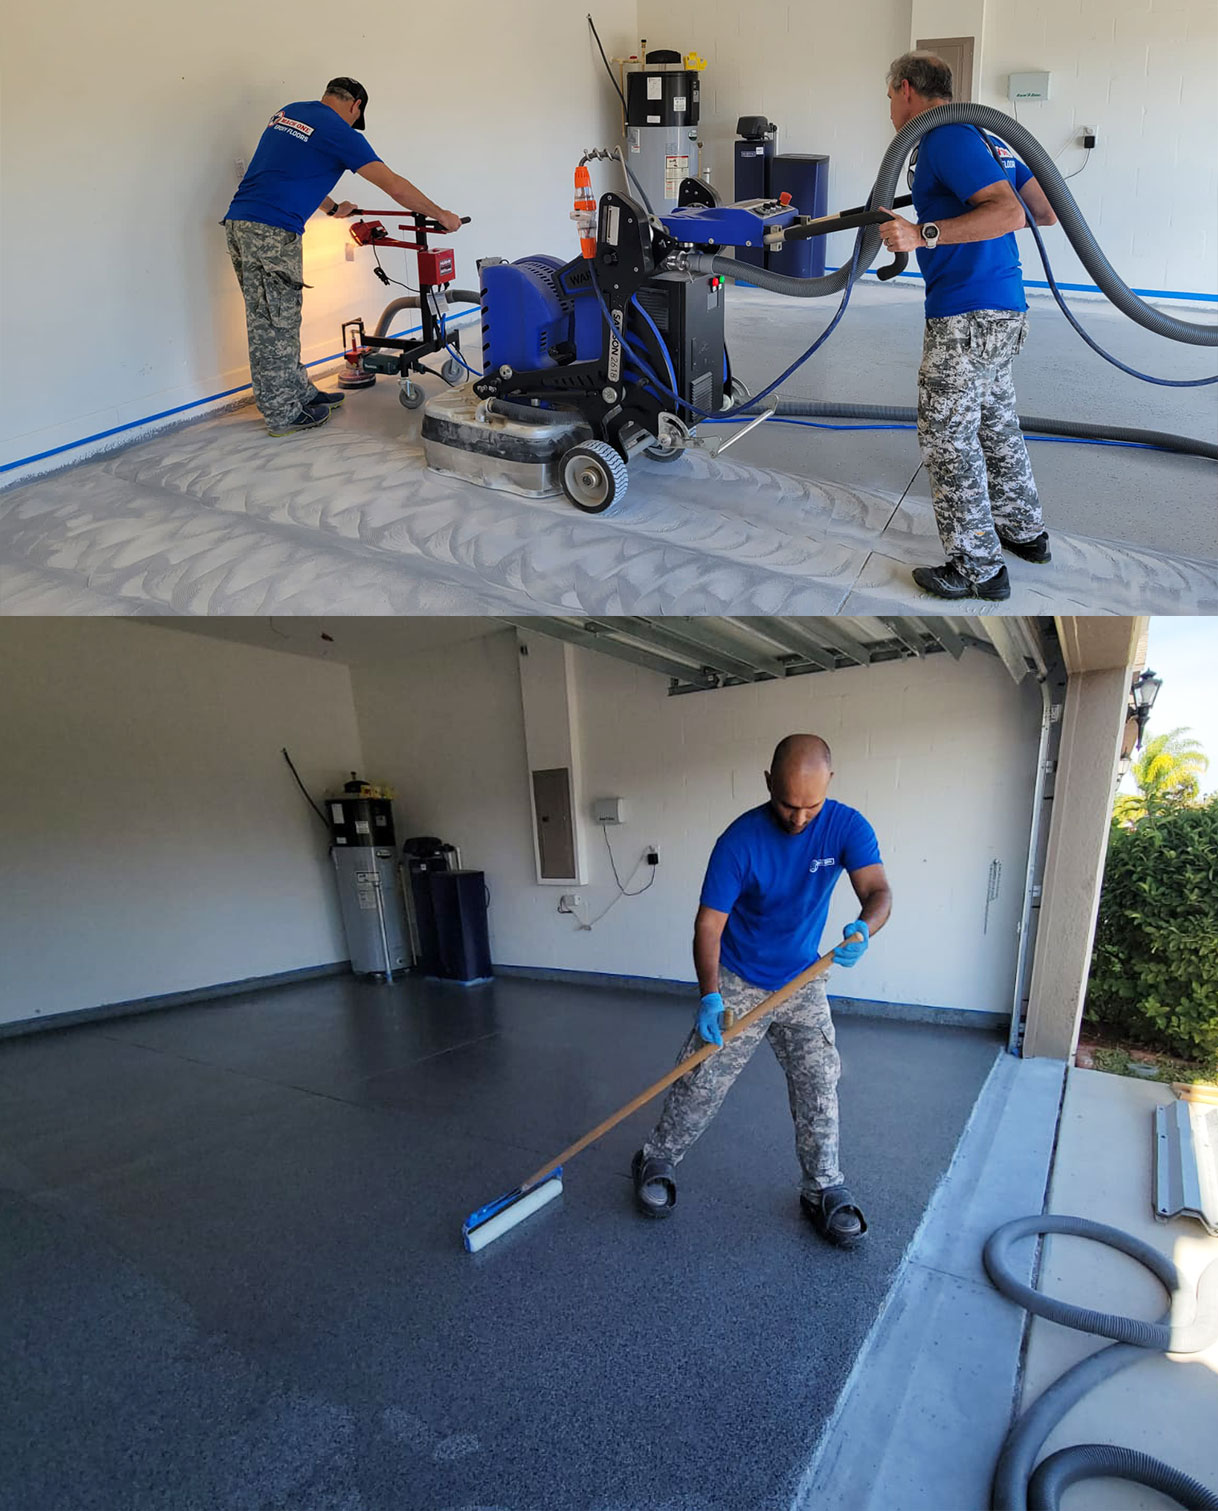 mach one team smoothing and pouring epoxy floor in garage